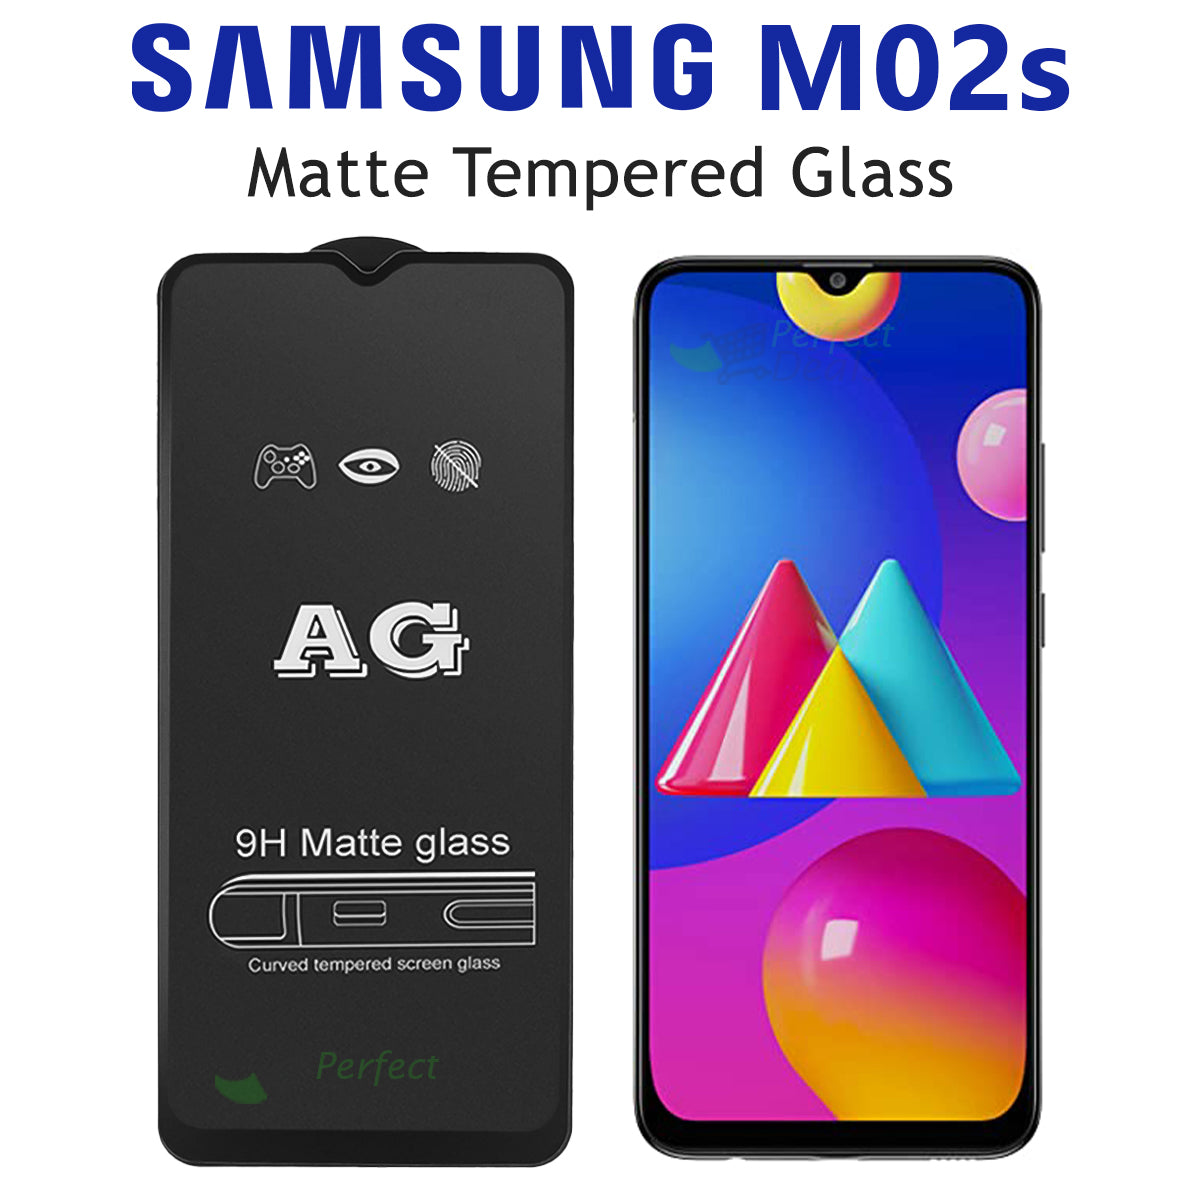 Matte Tempered Glass Screen Protector for Samsung Galaxy M02s